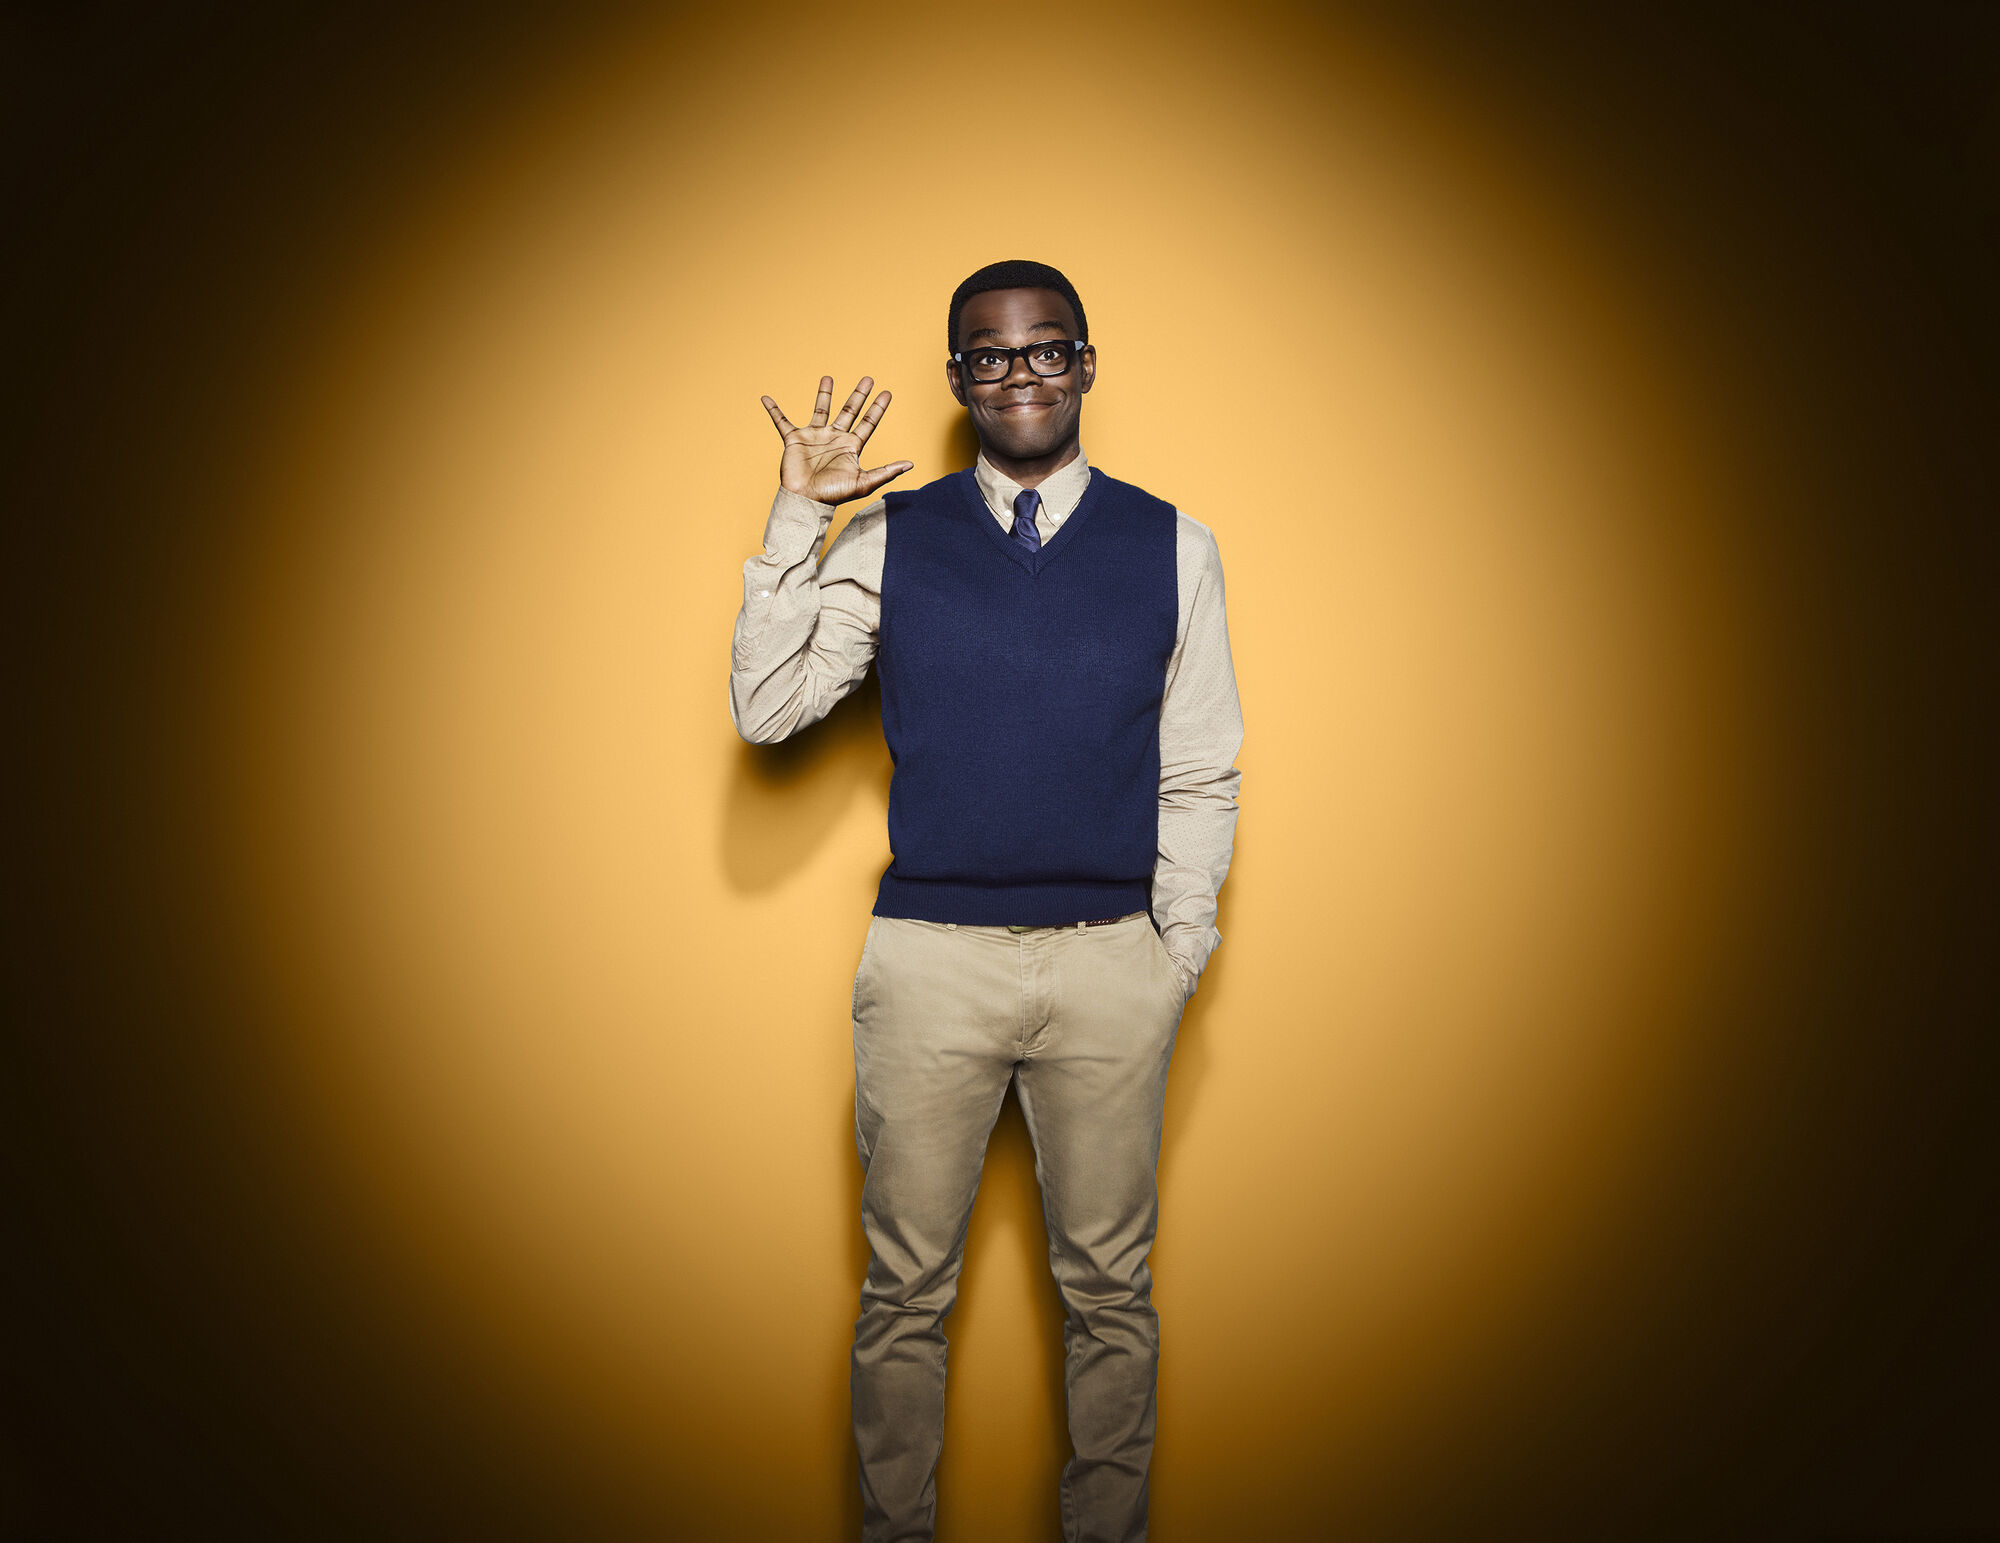 Chidi the Good Place